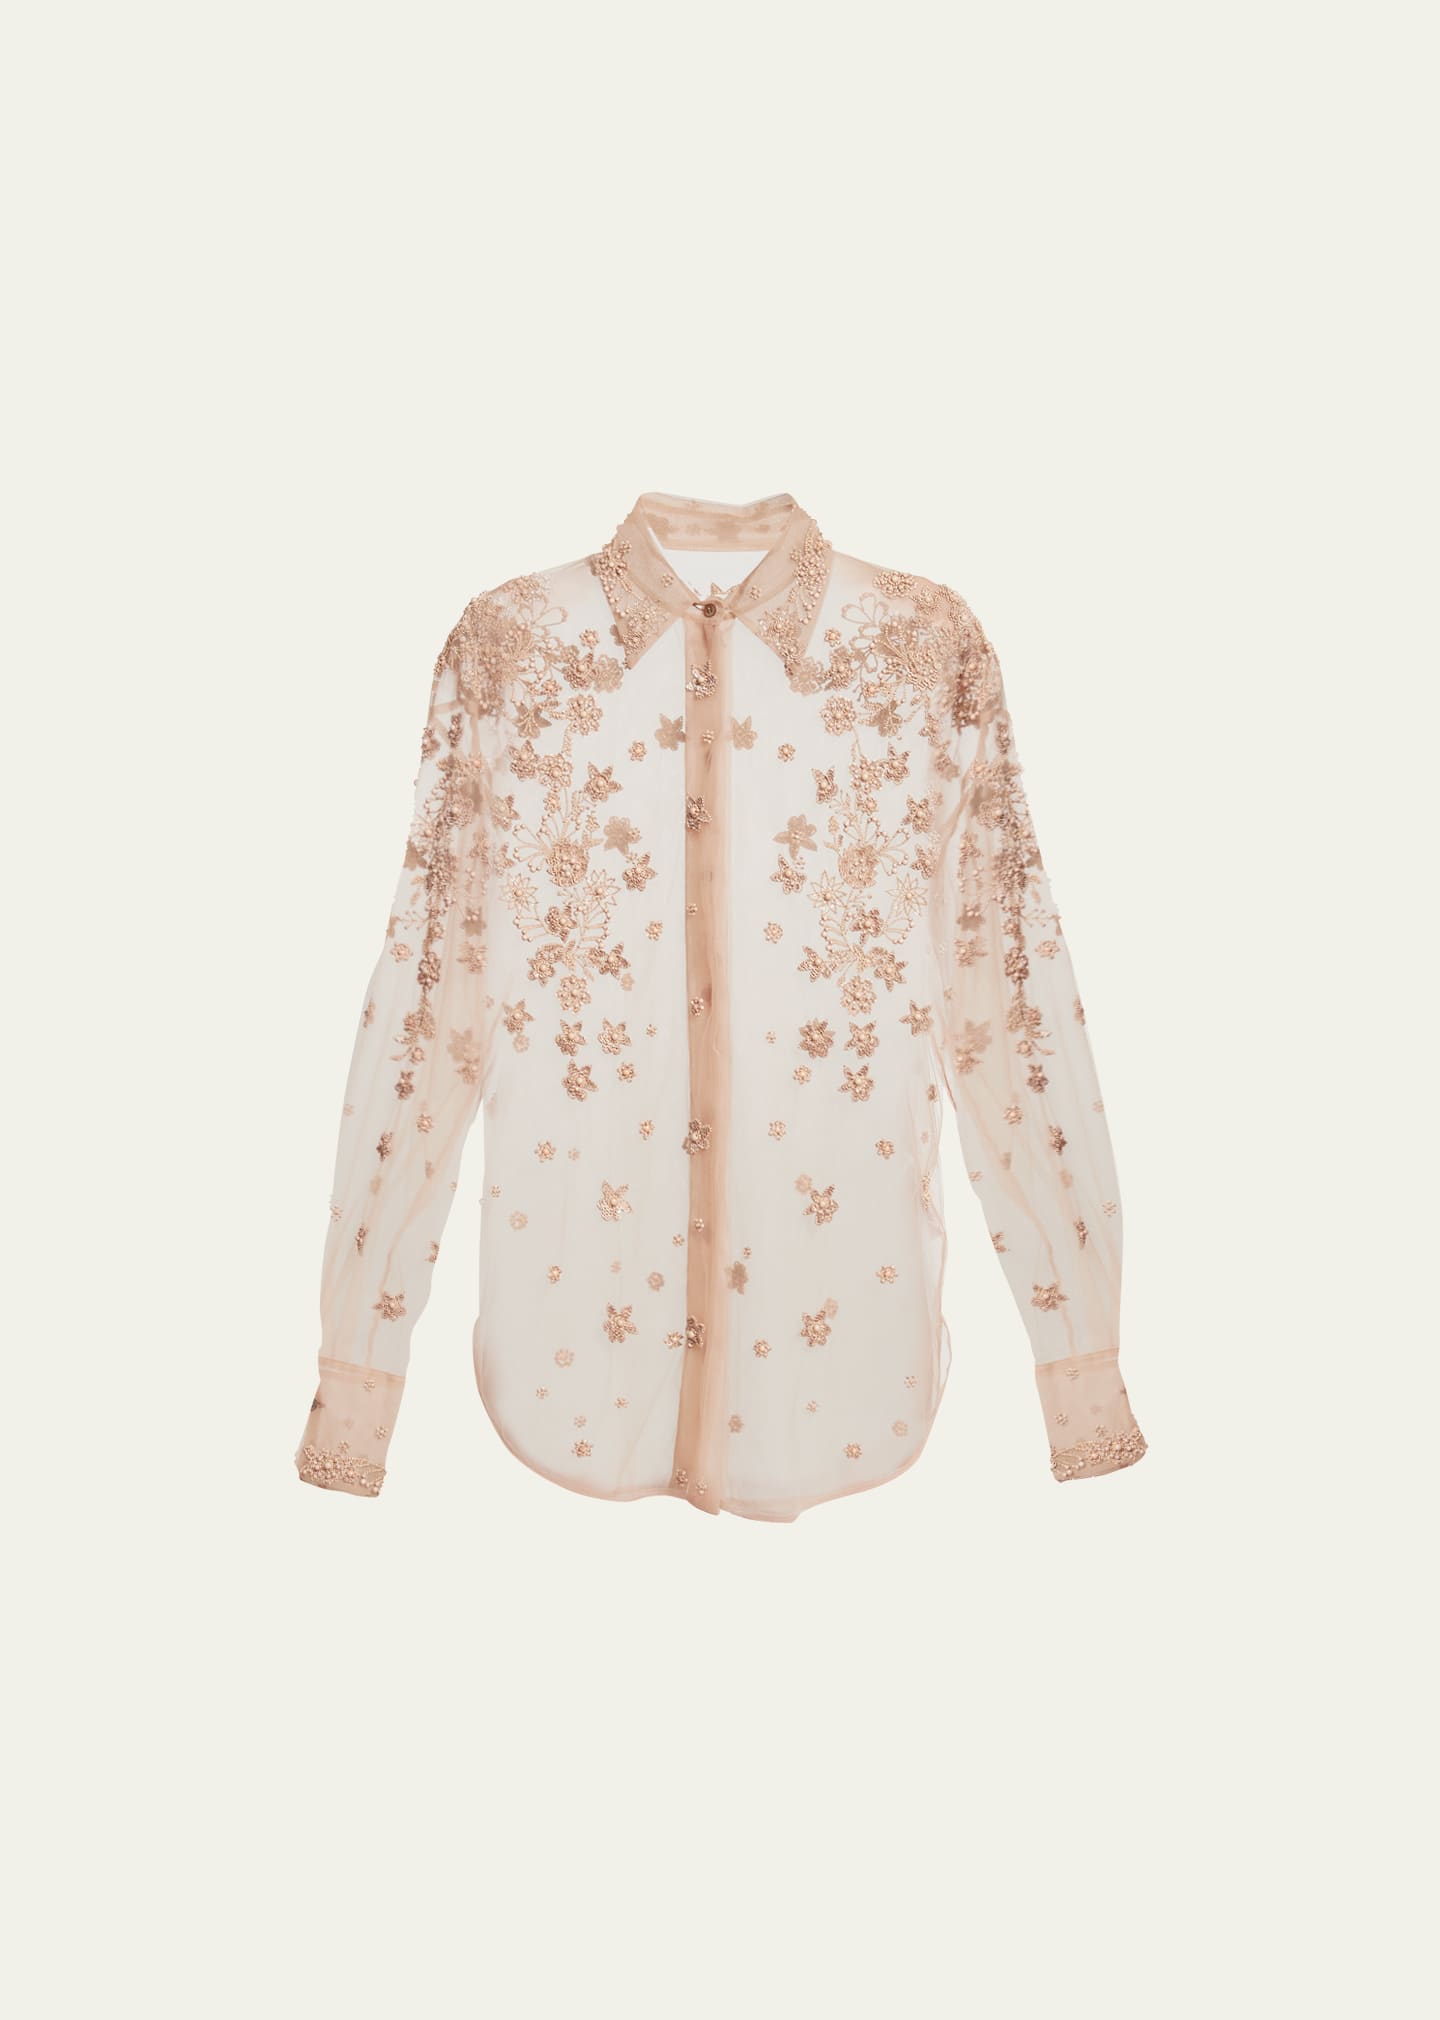 VALENTINO LONG-SLEEVE SHEER FLOWER EMBROIDERED BLOUSE